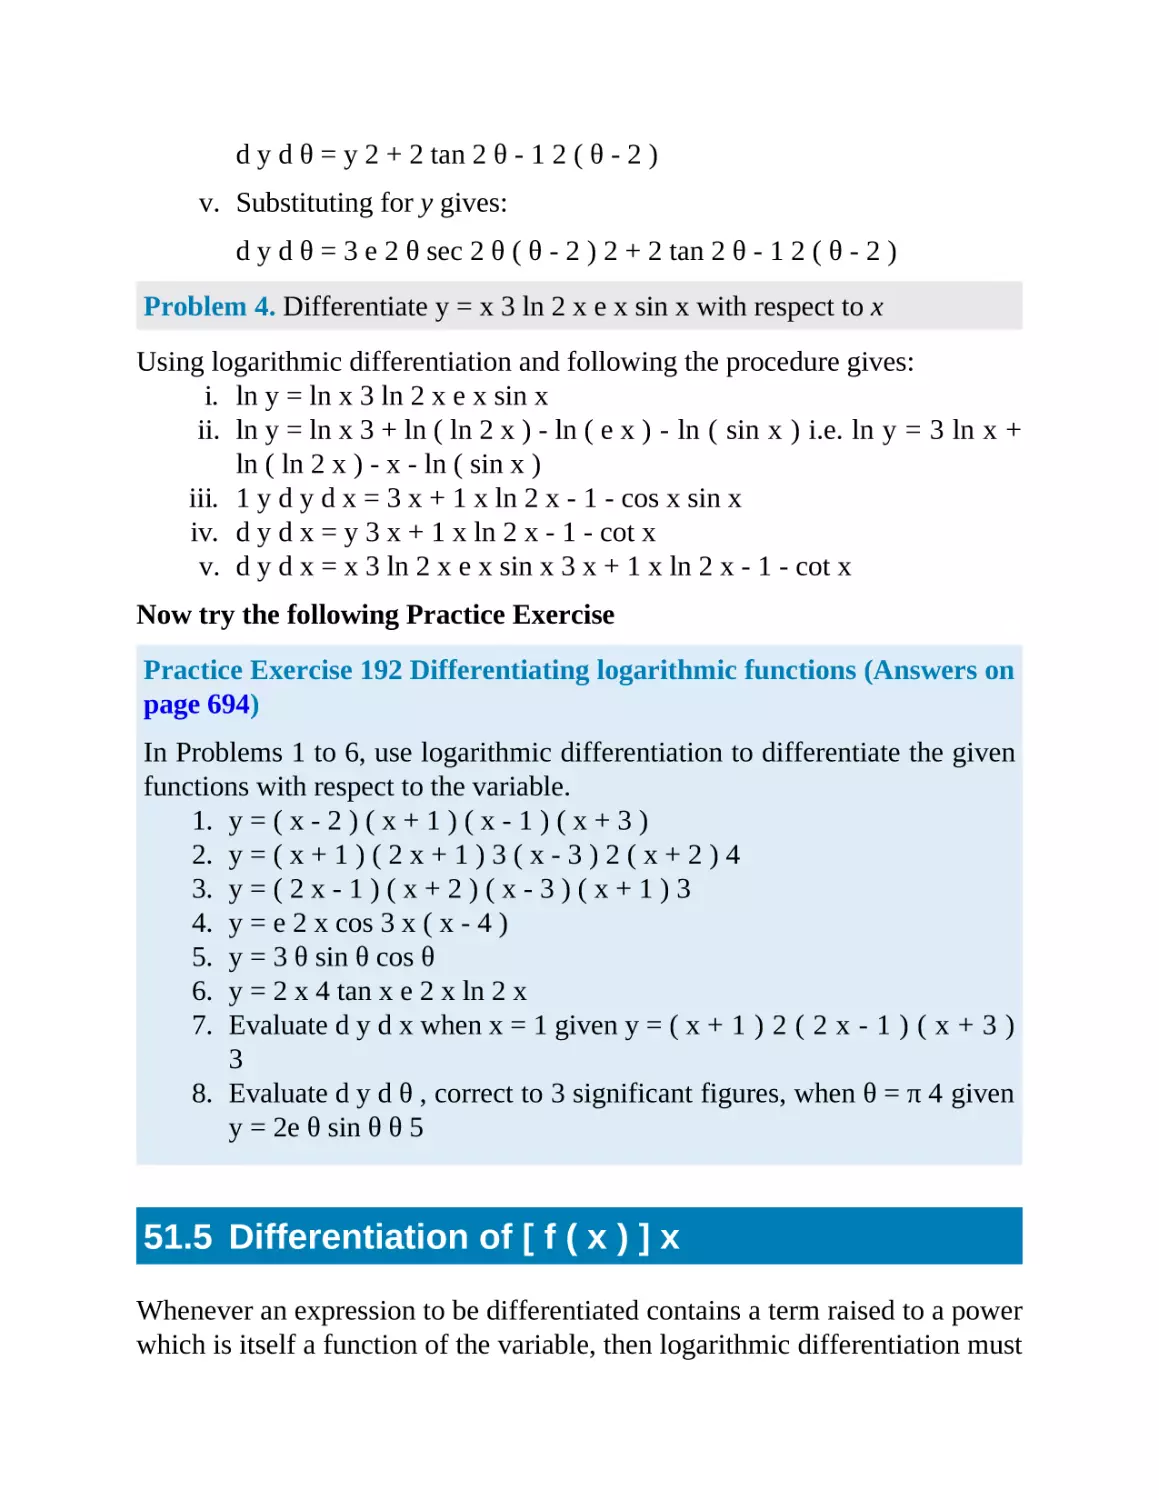 51.5 Differentiation of [